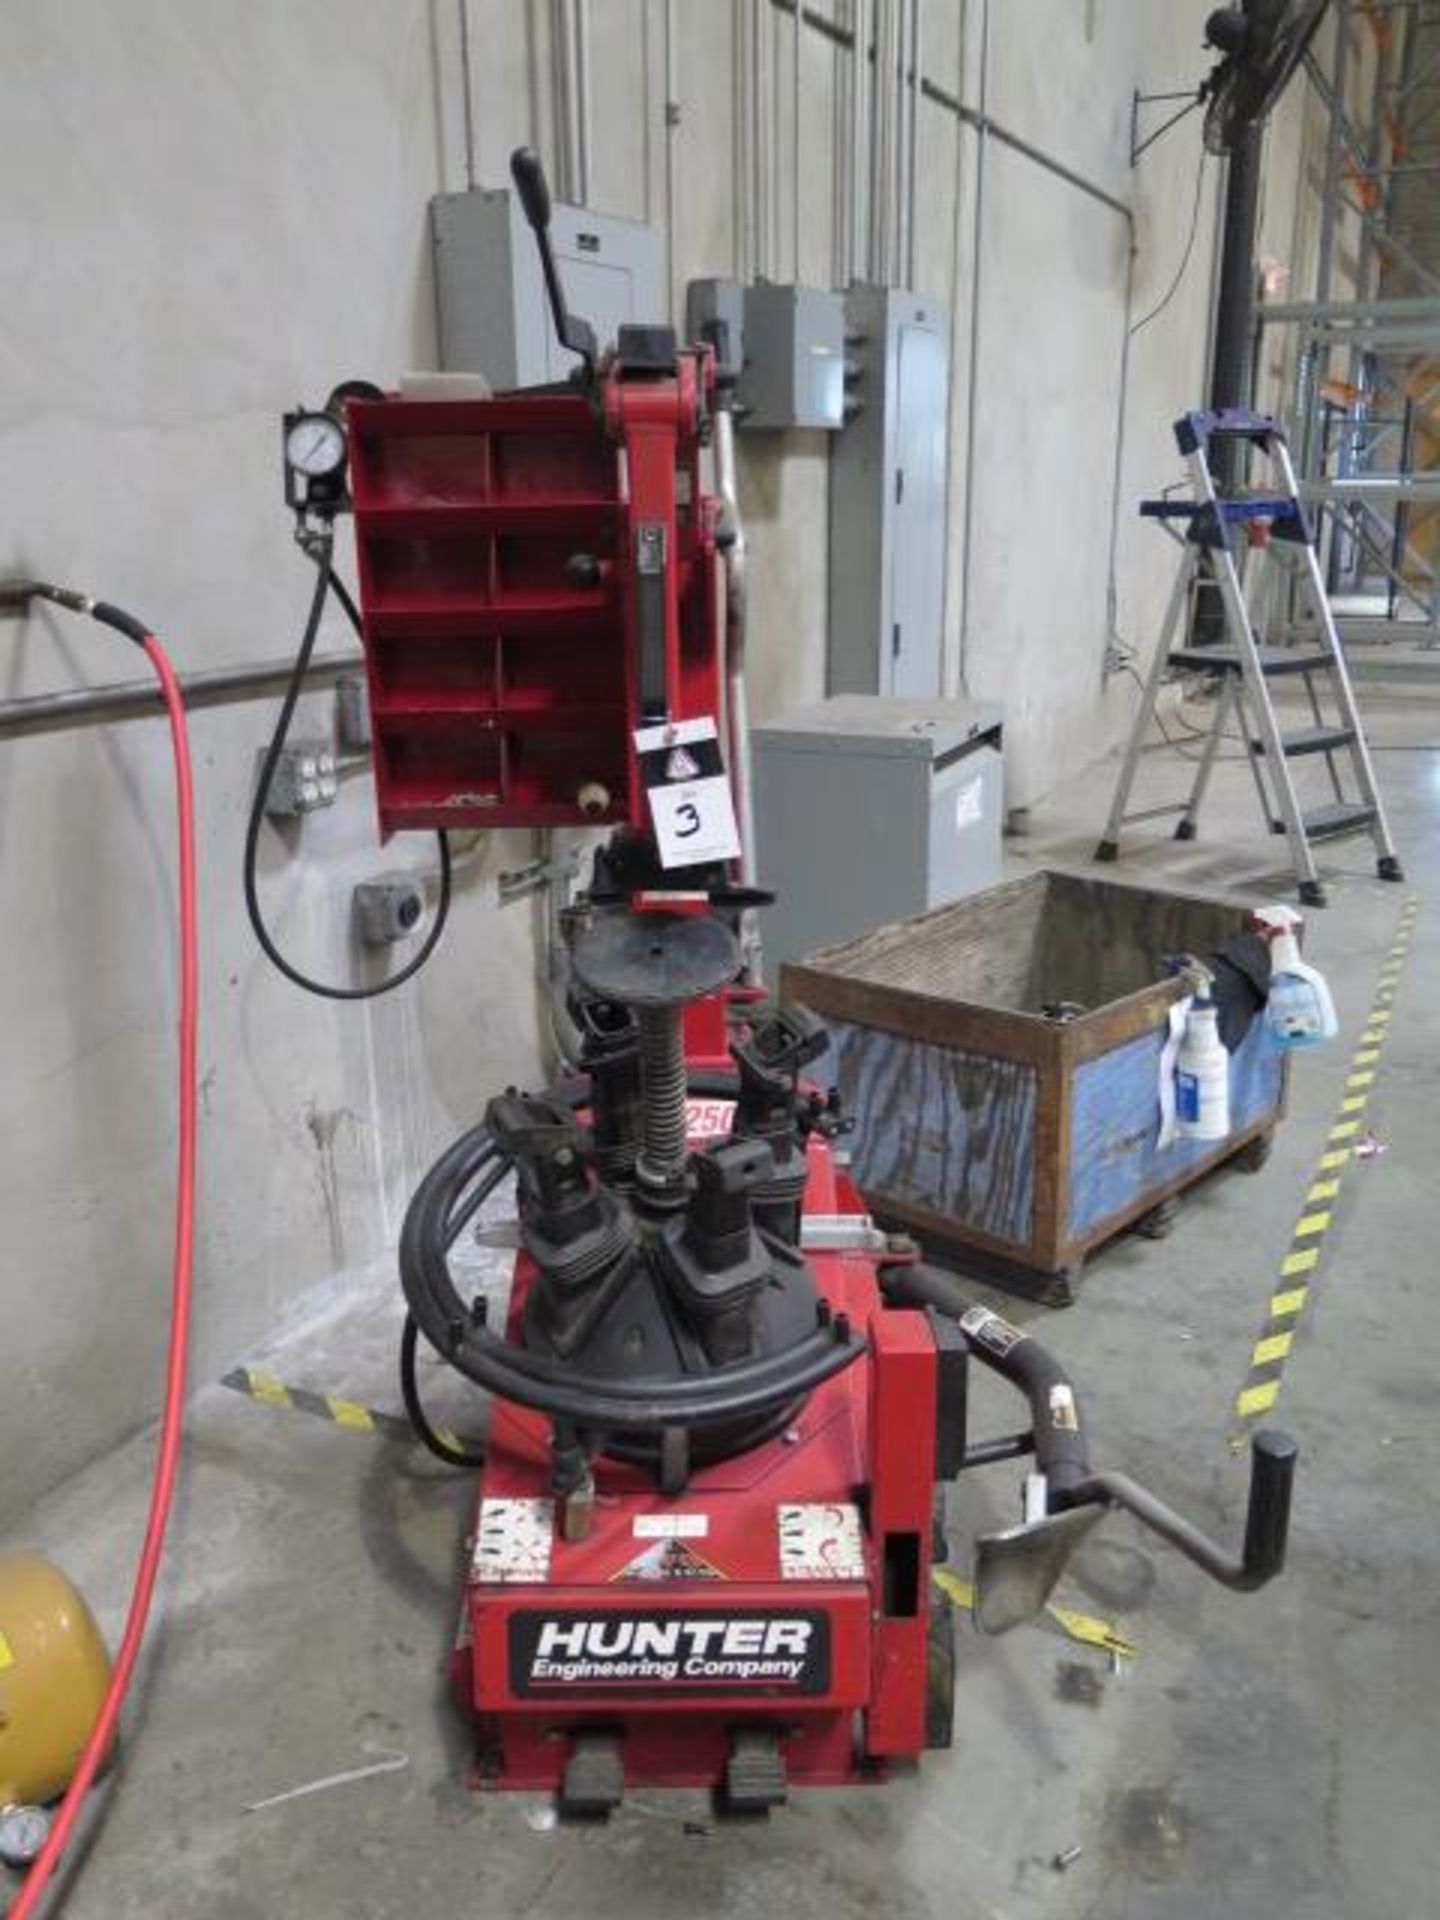 Hunter TC3250 mdl. 102K000 Tire Mounting Machine s/n 16696 (SOLD AS-IS - NO WARRANTY)